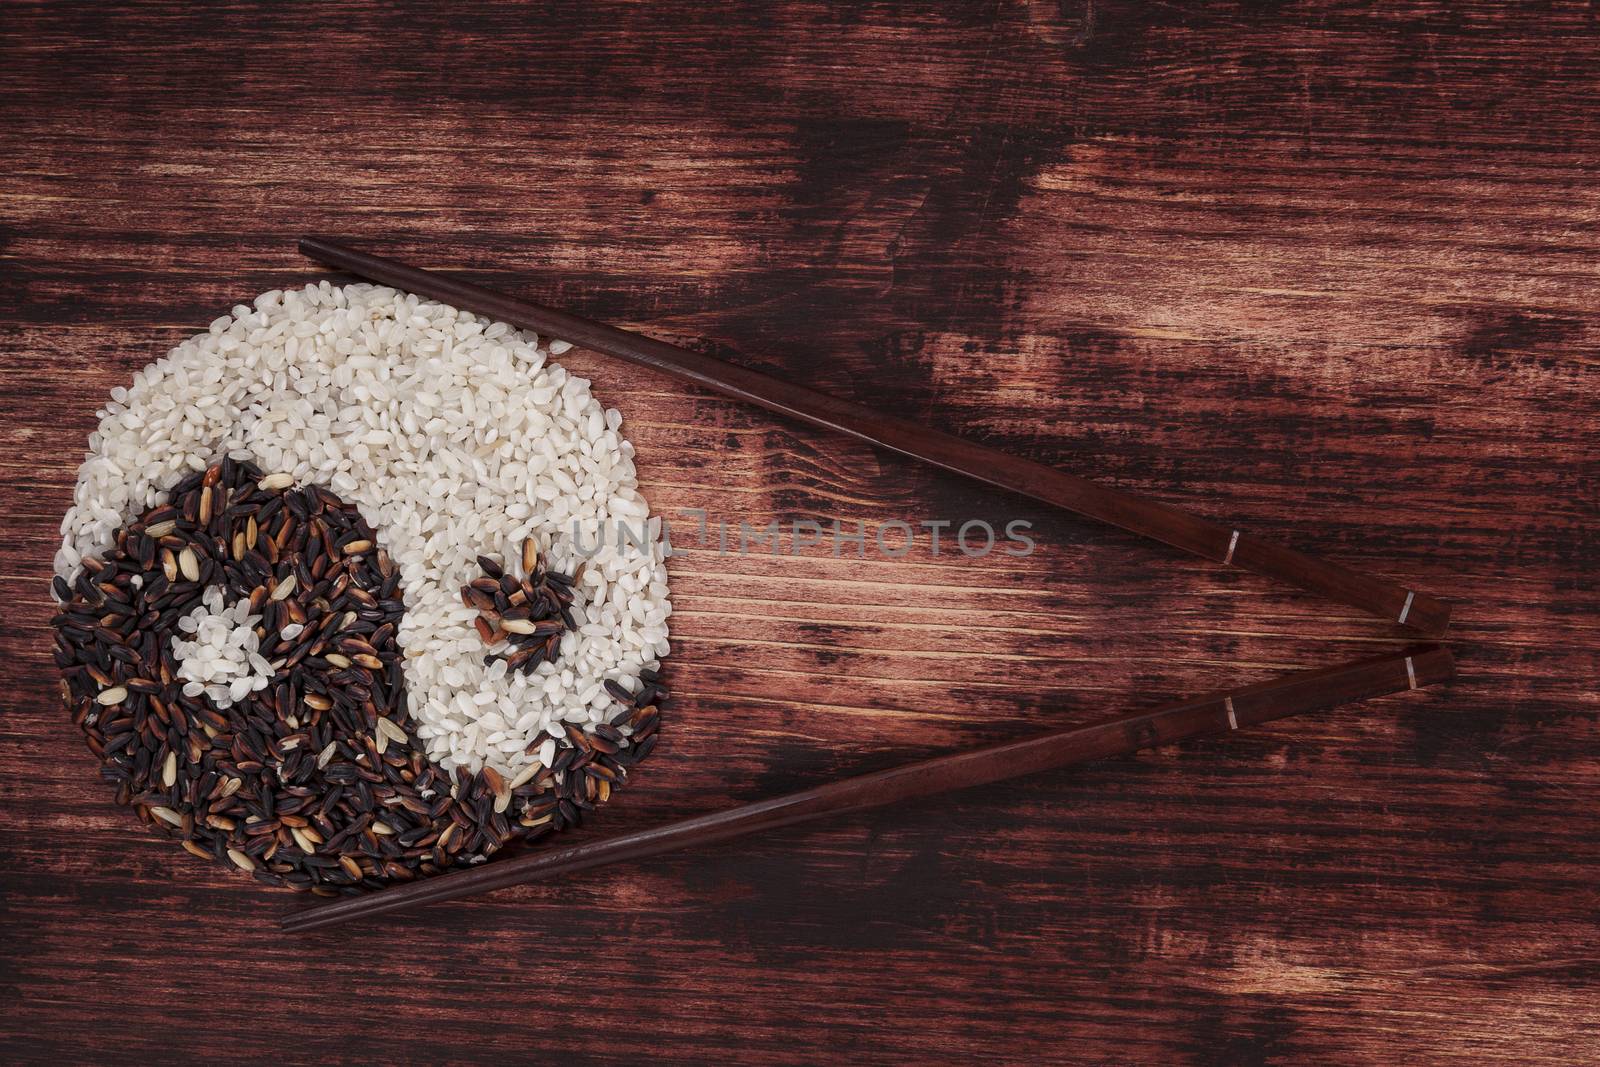 White and wild rice forming a yin yang symbol with chopsticks on dark wooden background. Top view.